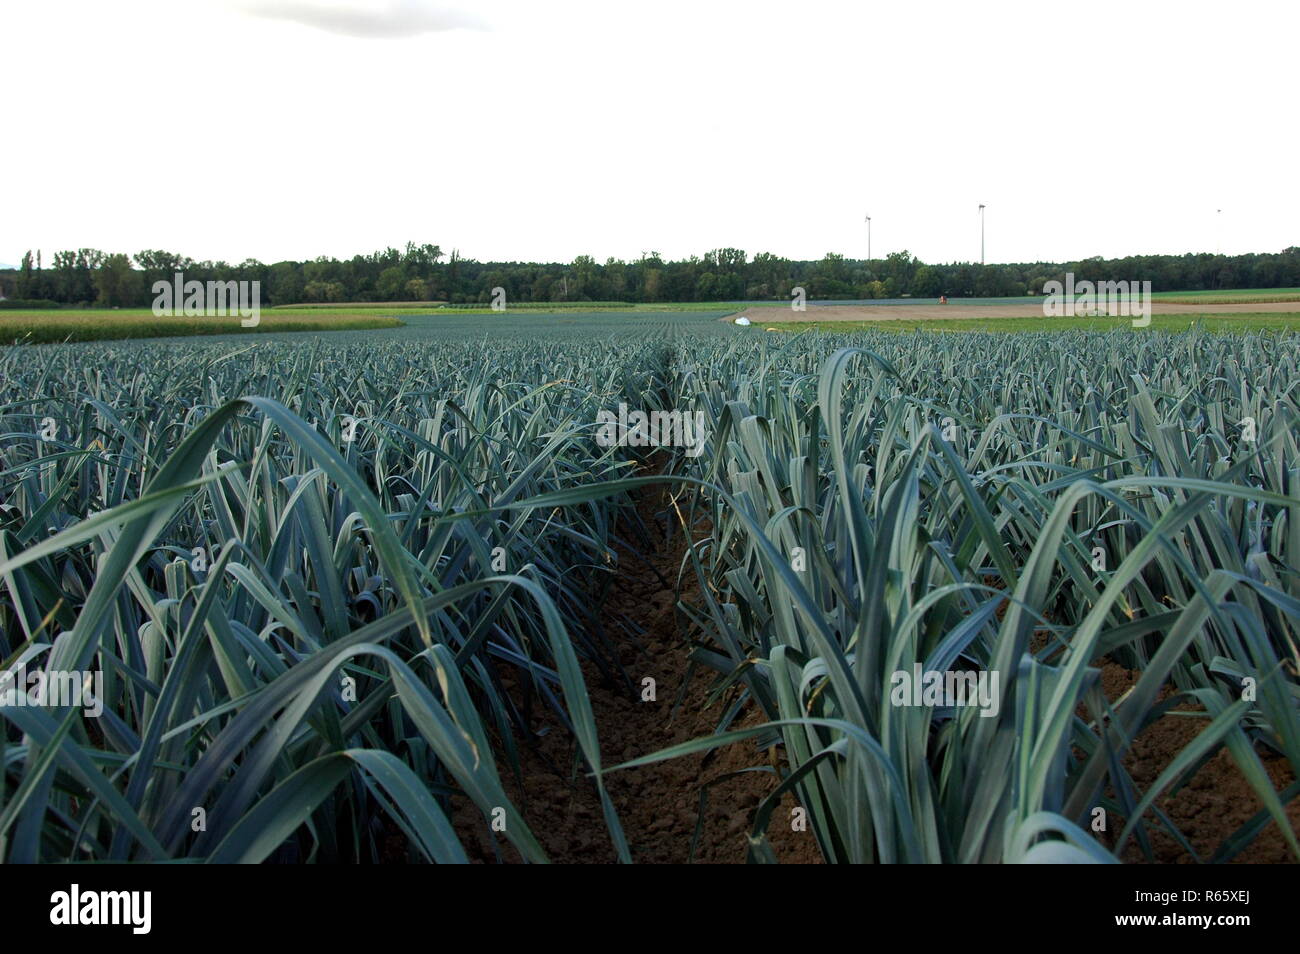 leek cultivation in kandel in the palatinate Stock Photo